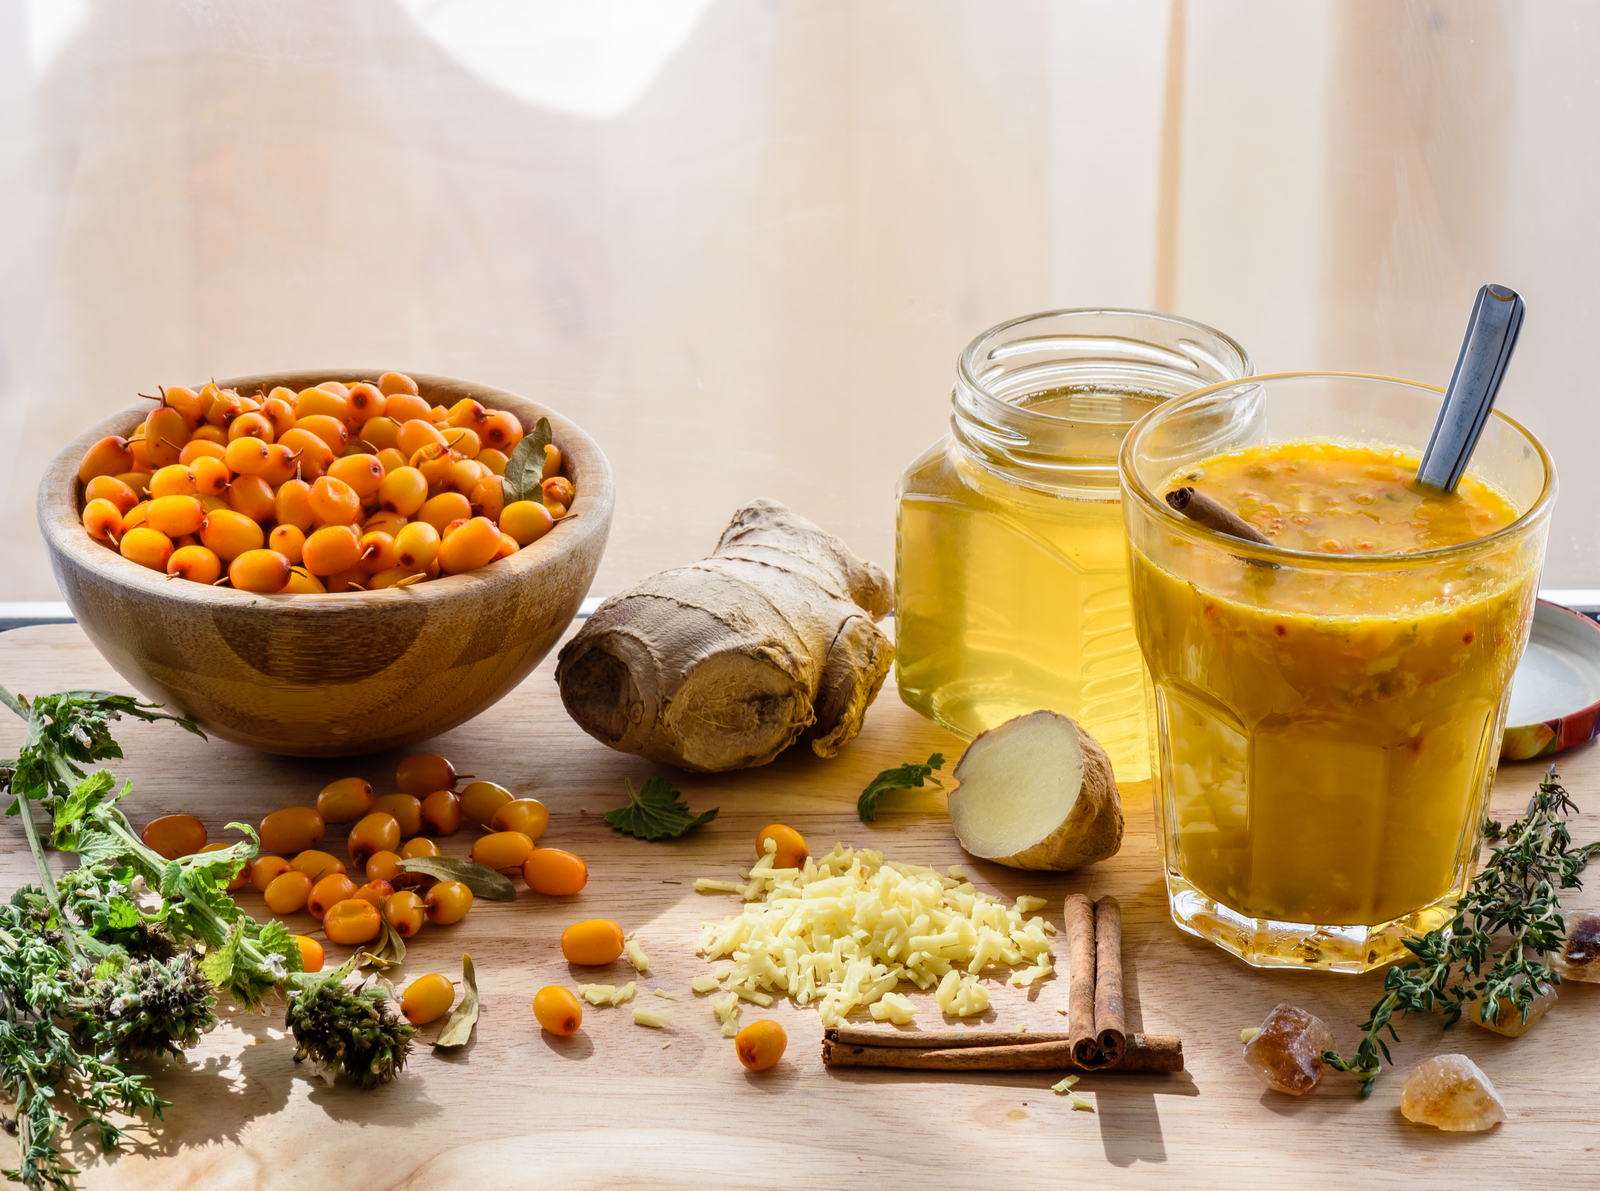 A bowl of sea buckthorn and ginger with a jar of liquid.